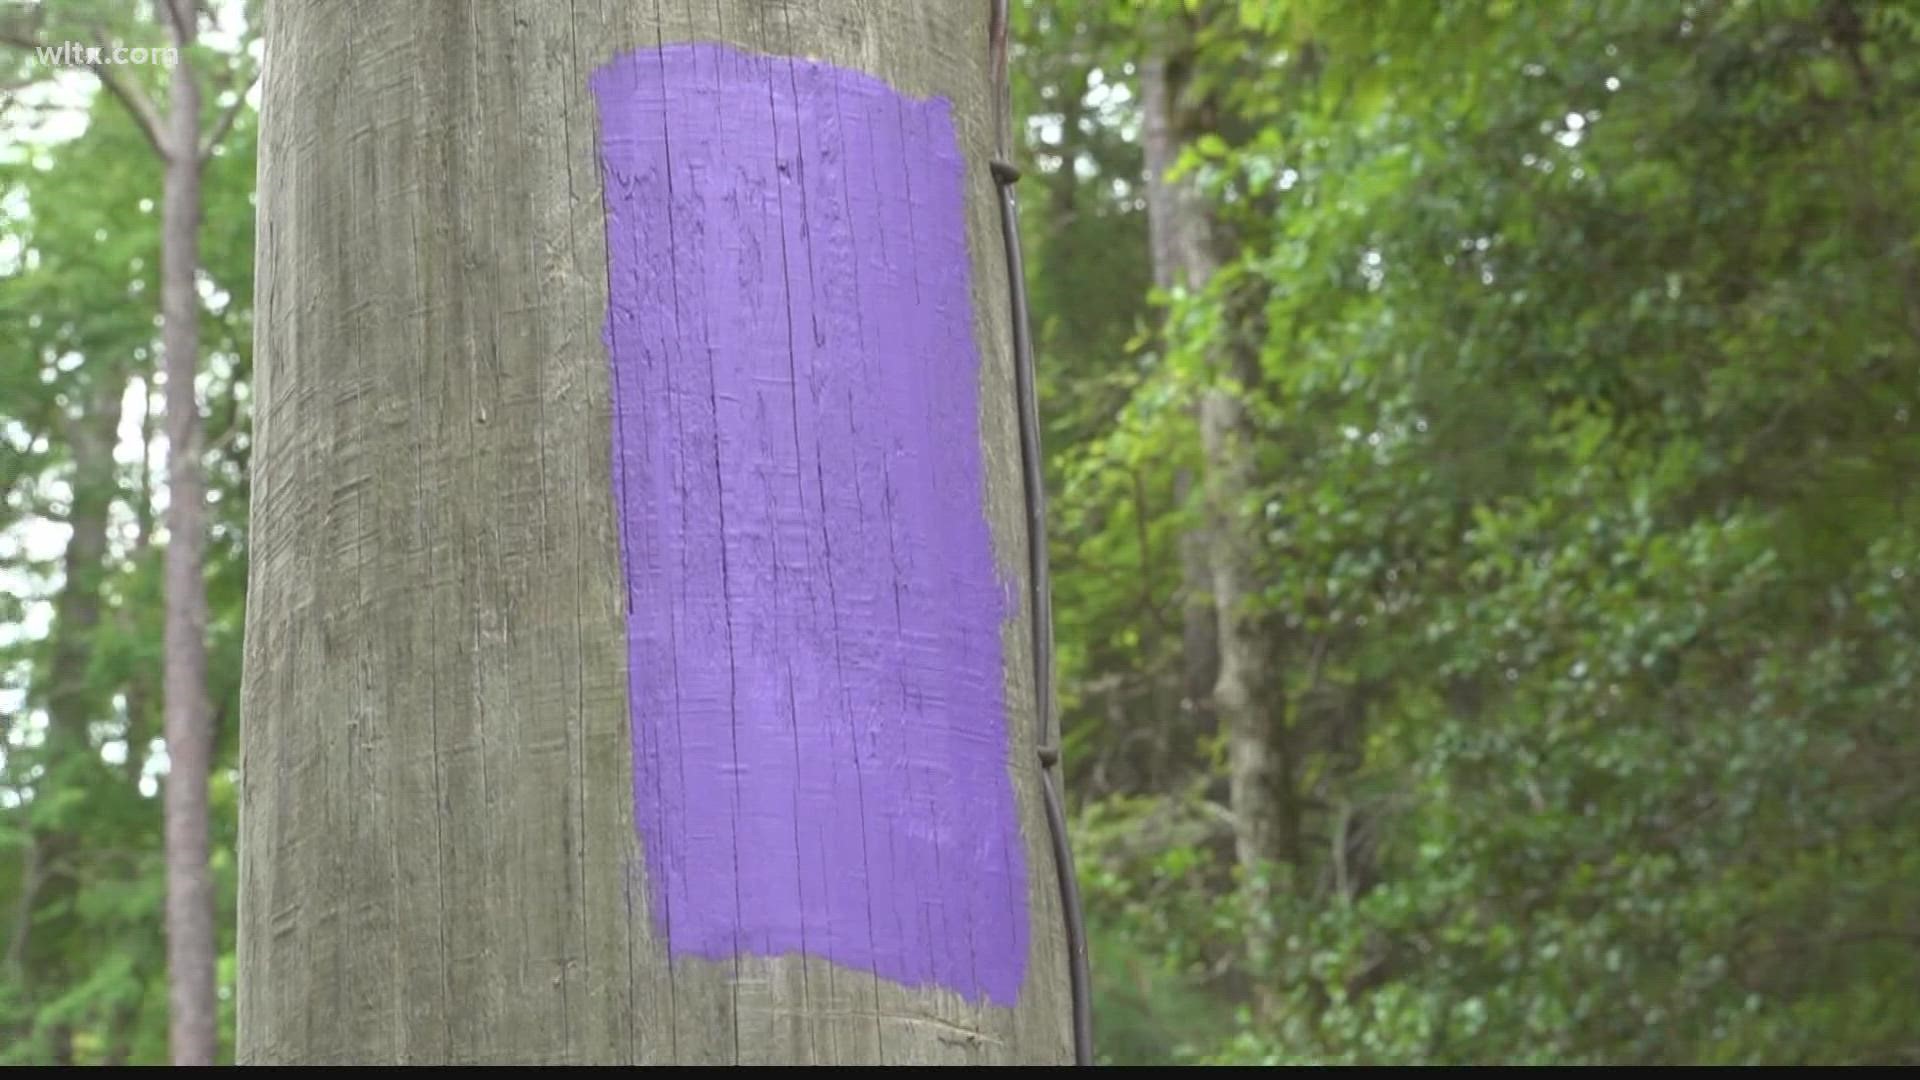 South Carolina landowners can now mark property boundaries with purple paint as another way to say, 'no trespassing.'